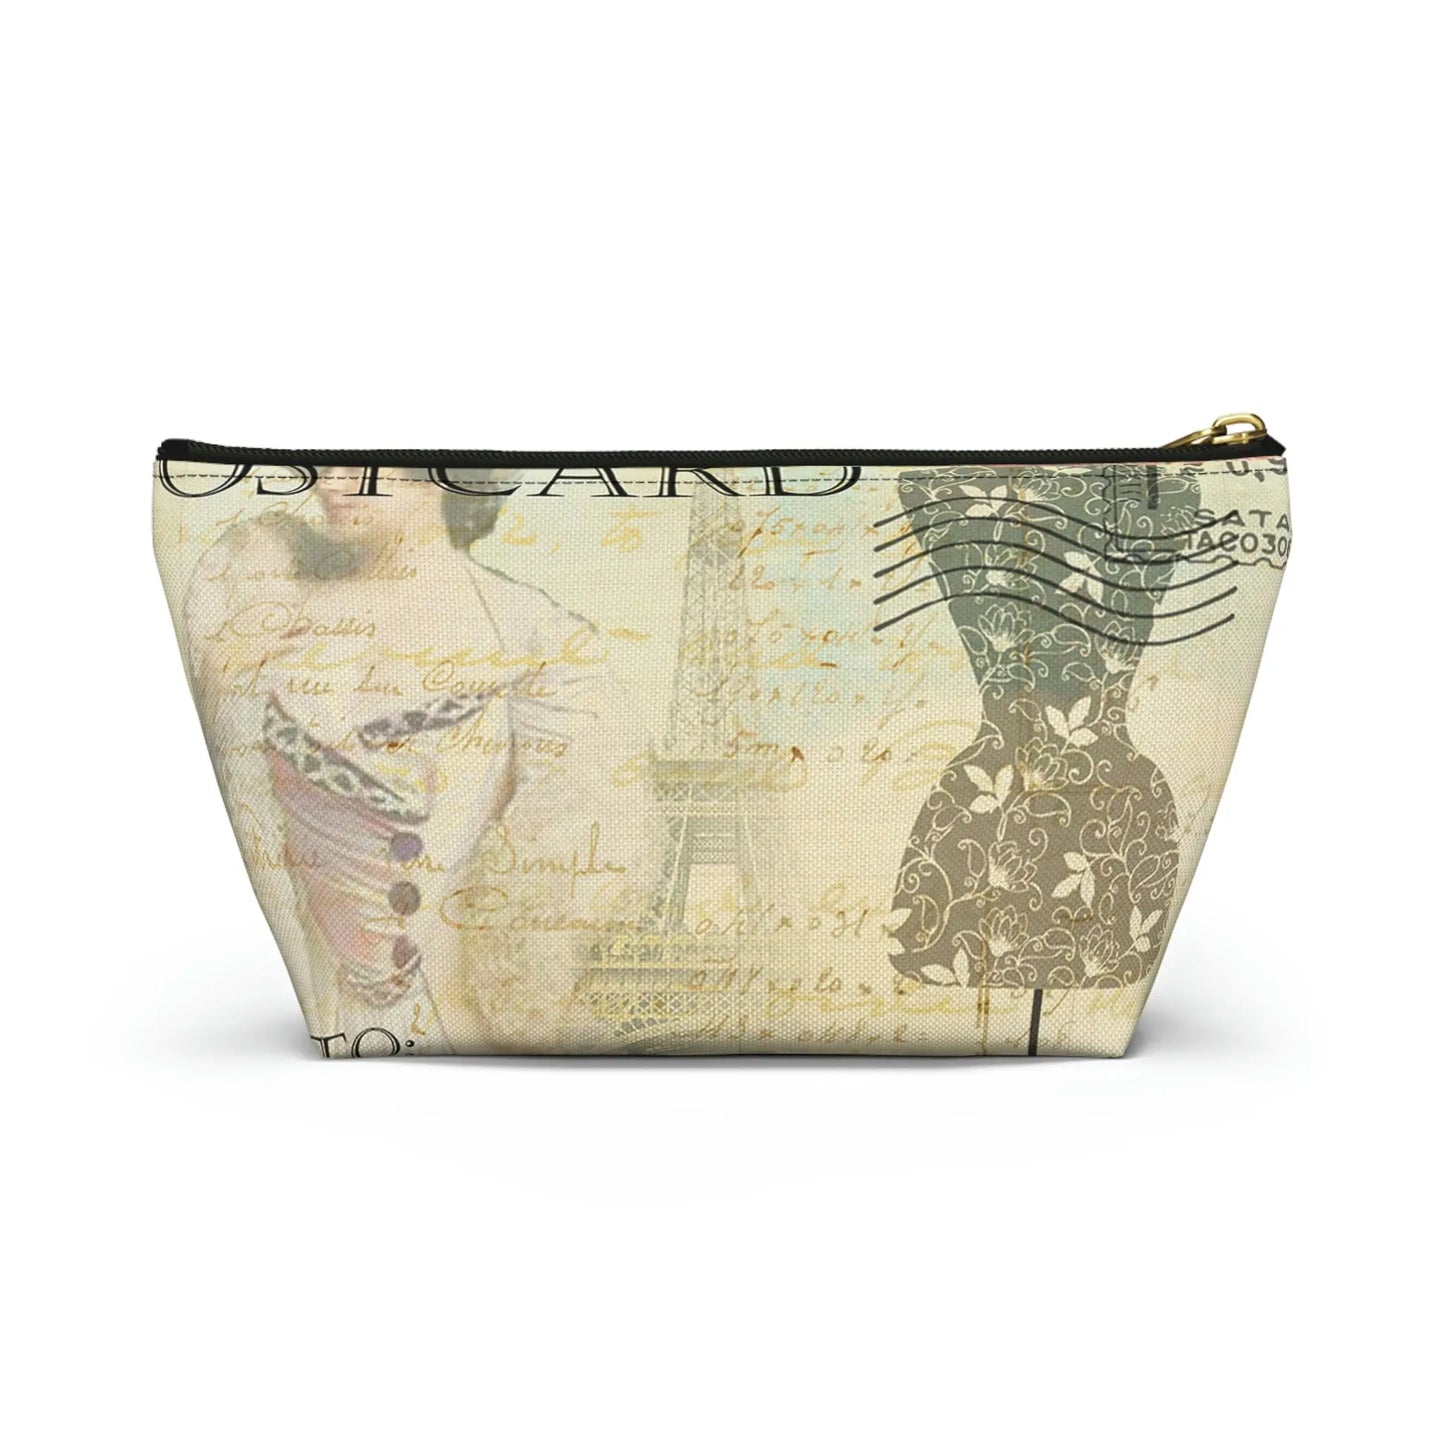 With God All Things Are Possible Makeup Accessory Pouch w T-bottom - Vintage Paris Dressmaker Printify